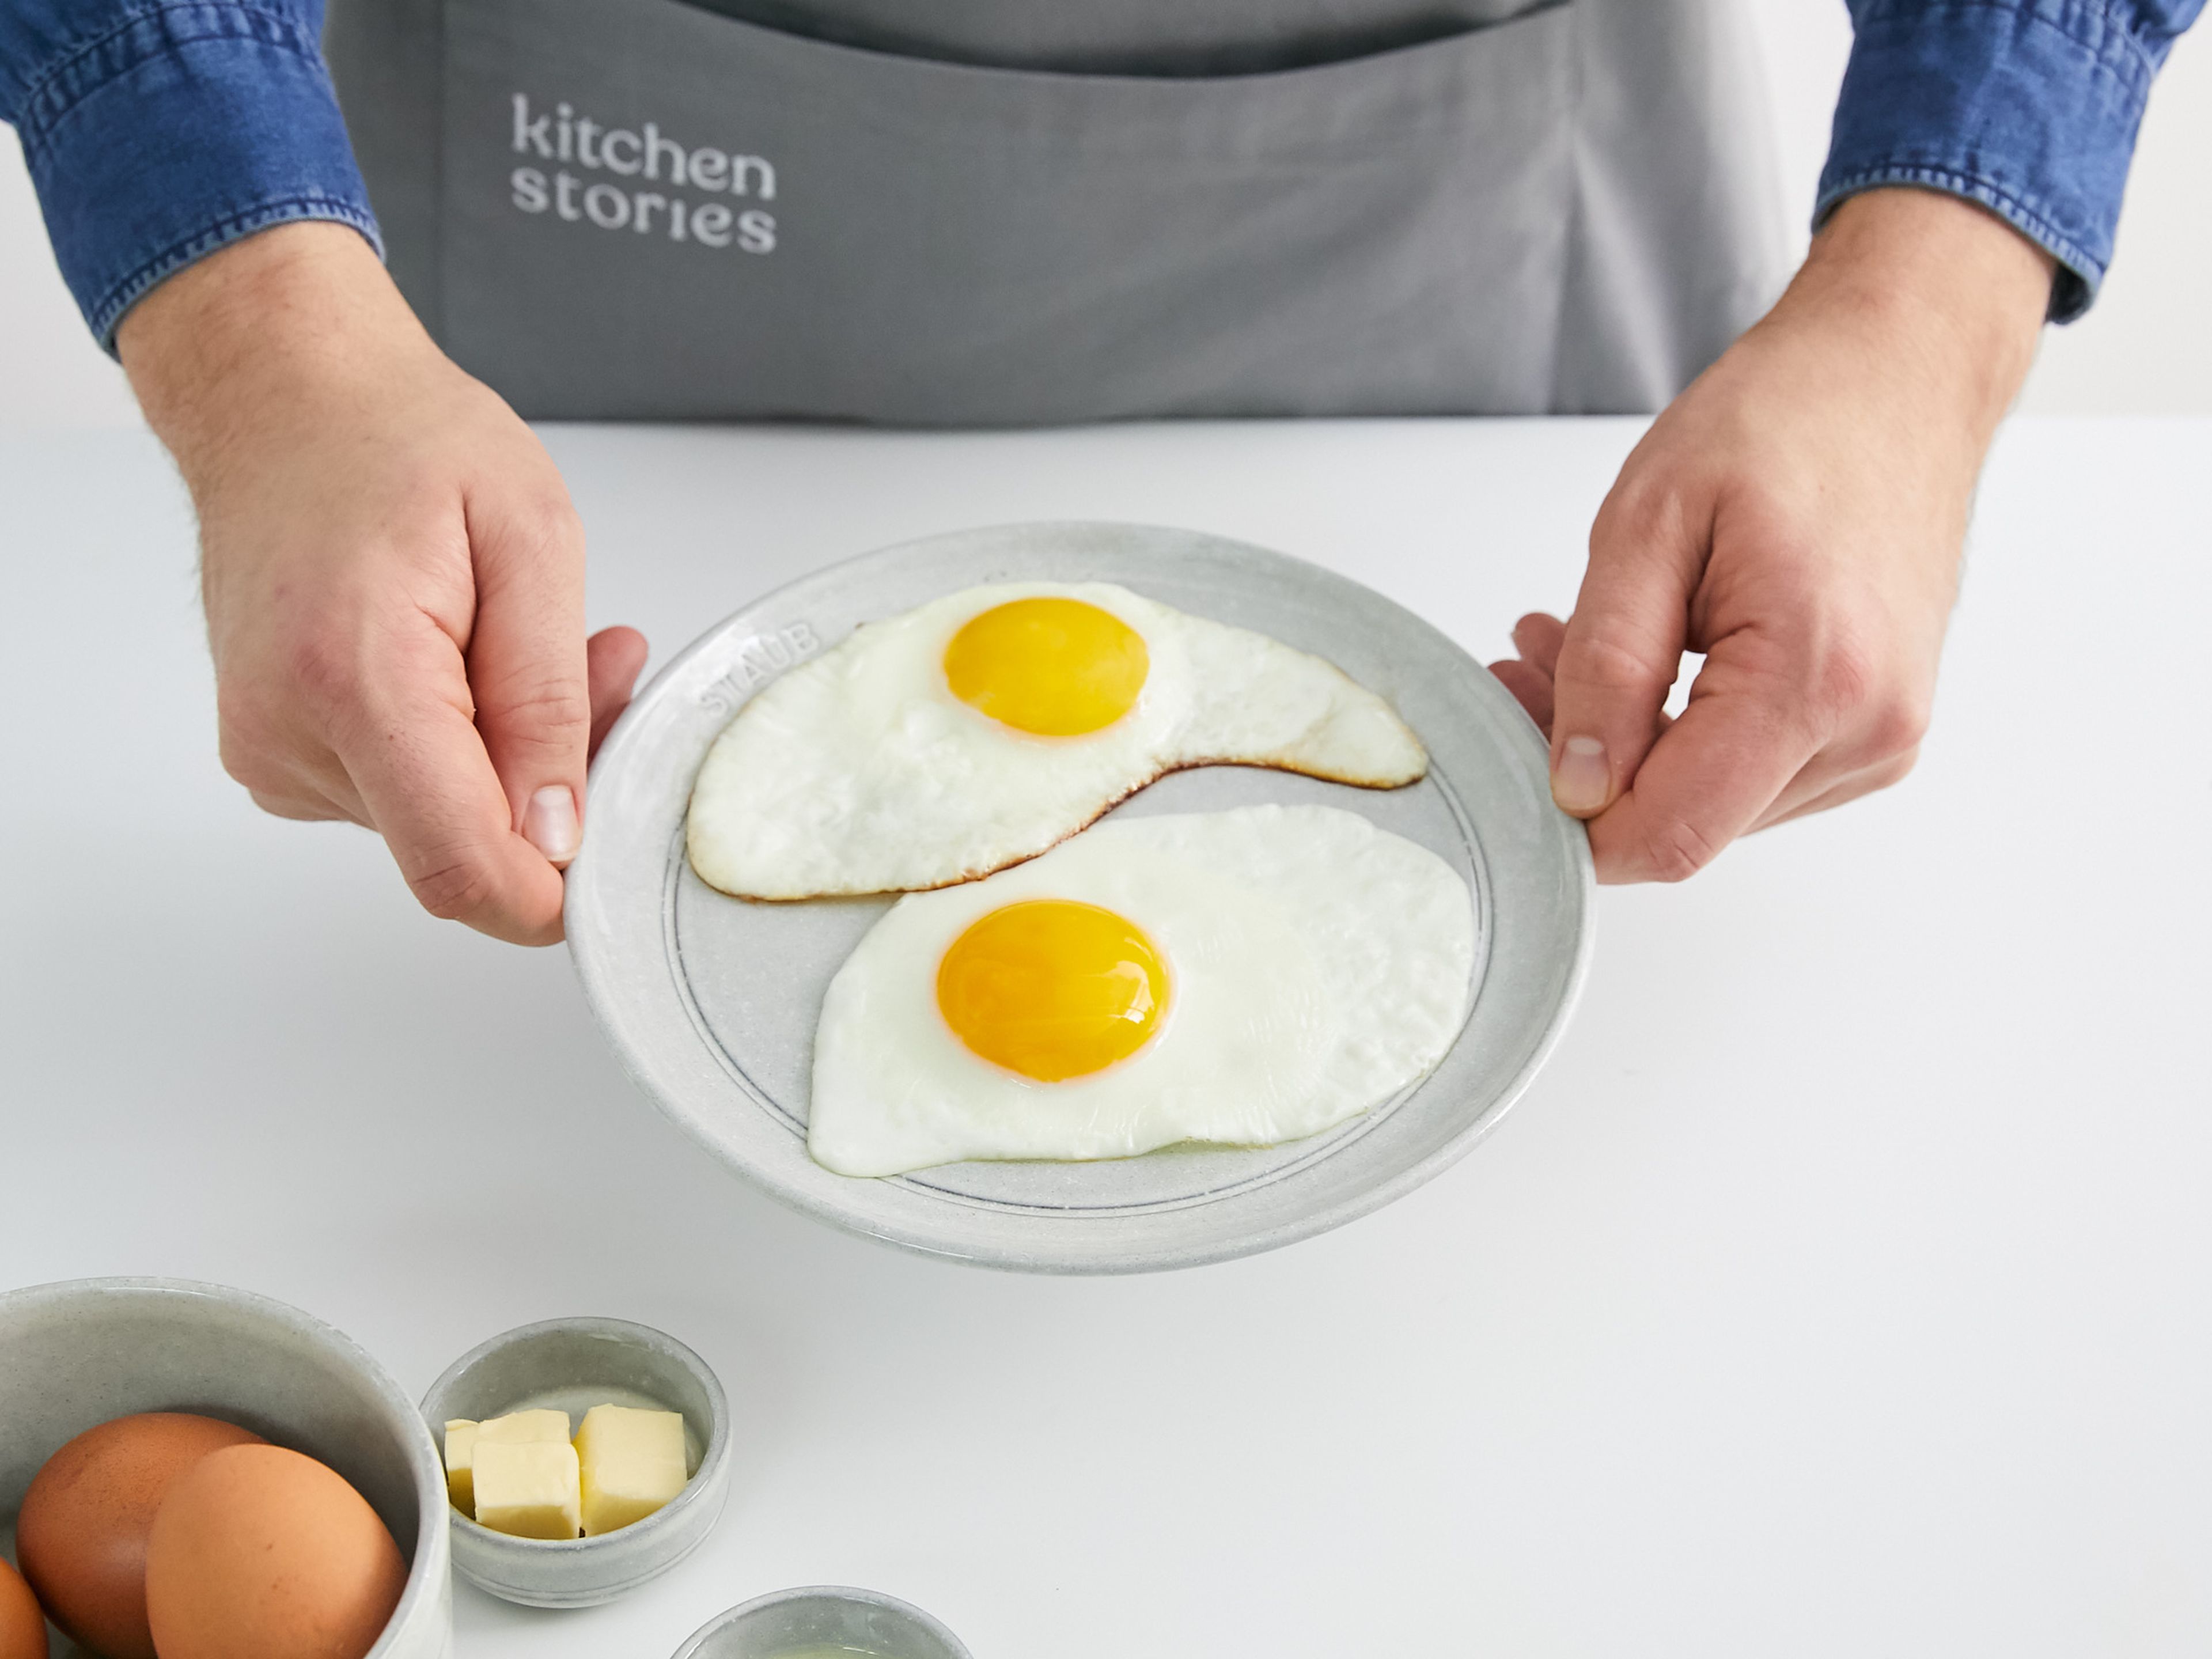 To make fried eggs, add vegetable oil to a nonstick pan over low heat and spread evenly with a paper towel. Crack eggs over the pan and add in carefully, let fry slowly until done. If you’d like a crispy sunny-side-up egg, add butter to the pan and let fry over high heat for approx. 2 mins., make sure the yolk is still runny. Season to taste with salt and pepper.